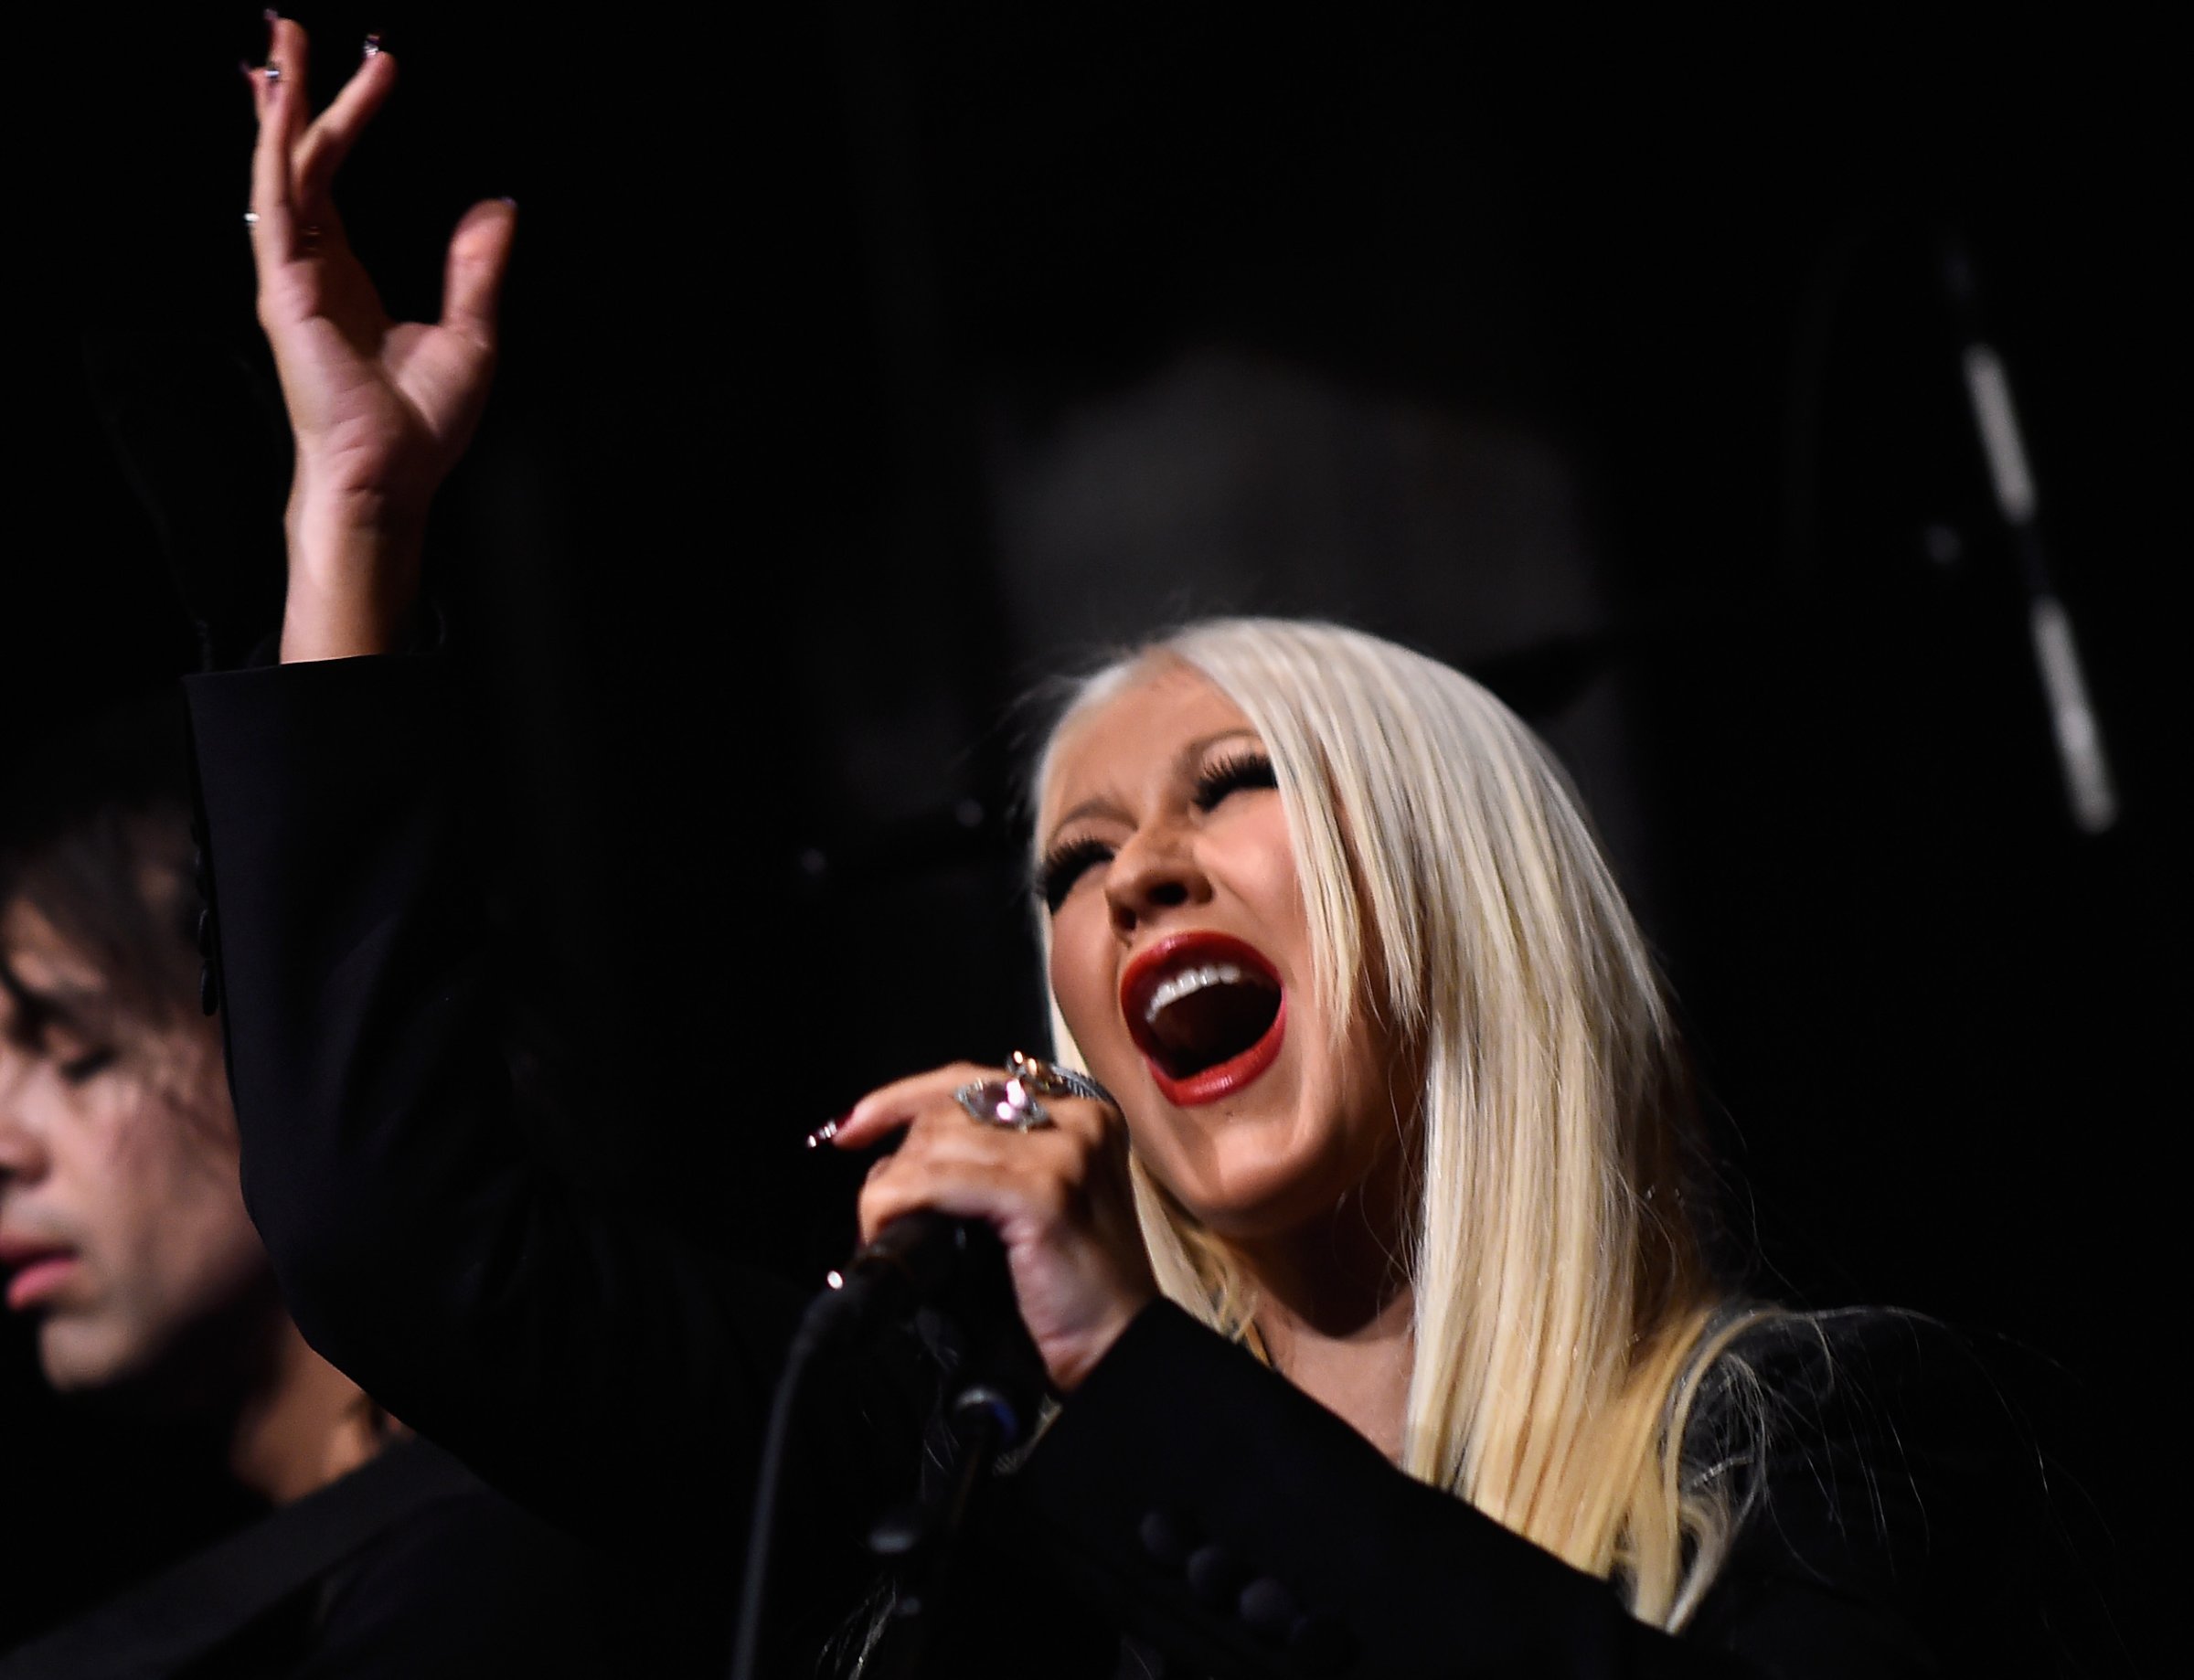 Singer Christina Aguilera performs at the Linda Perry Celebration For The Song "Hands Of Love" From The Film "Freeheld" on Jan. 5, 2016 in Los Angeles, California.